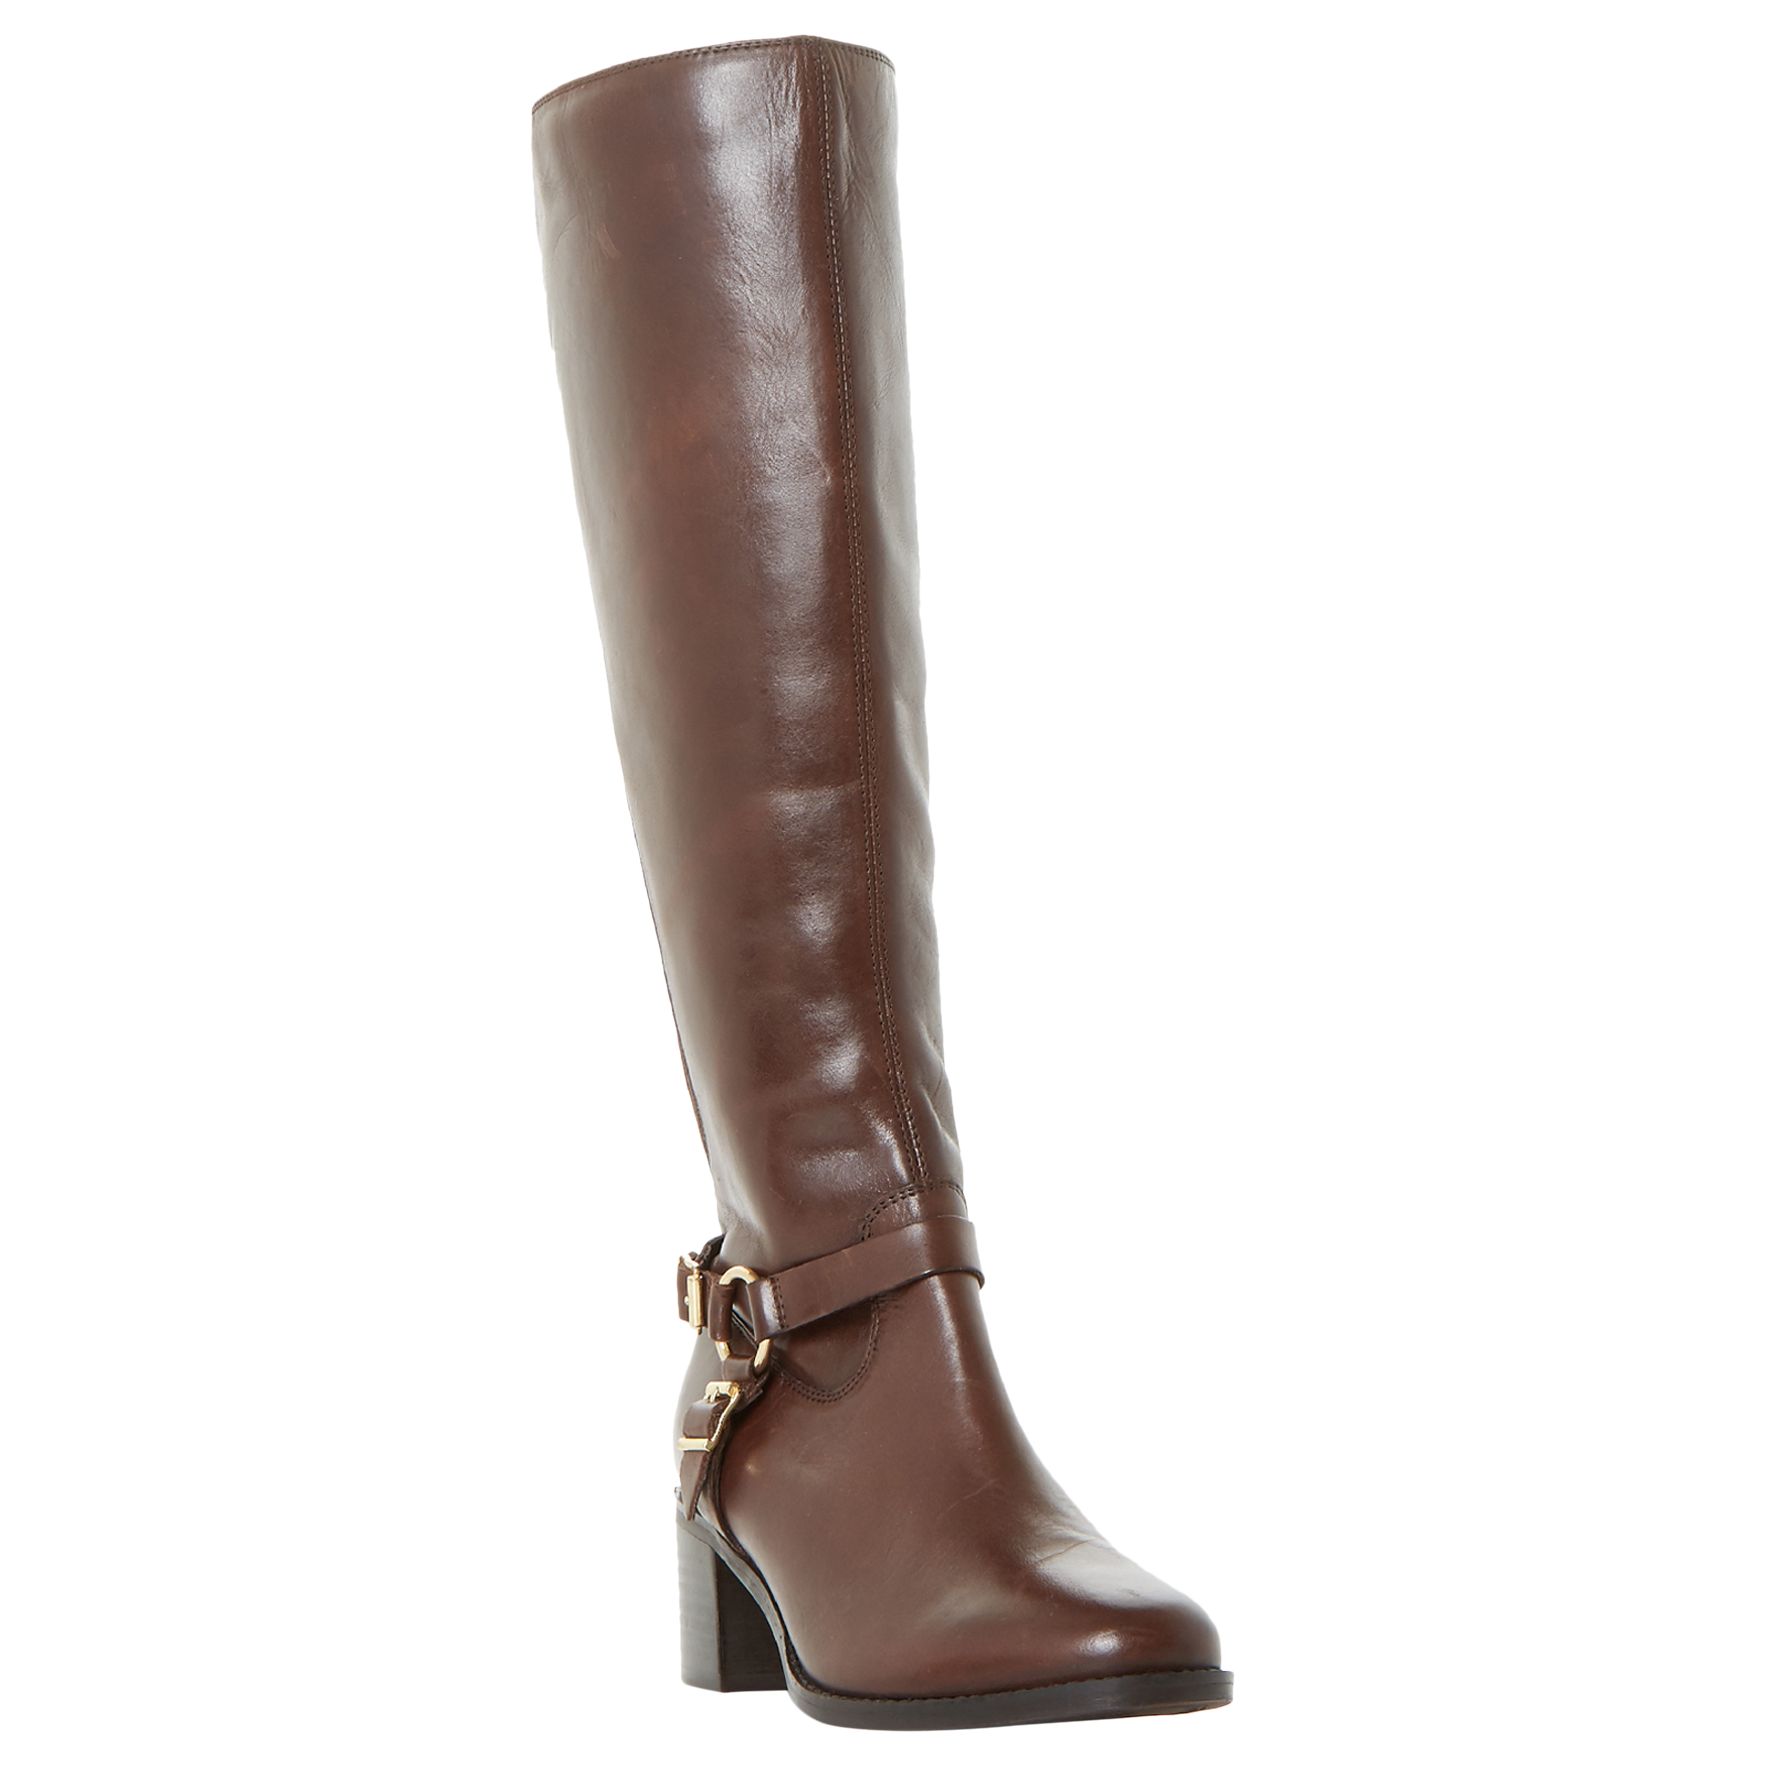 Dune Vicky Block Heeled Knee High Boots, Brown, 5